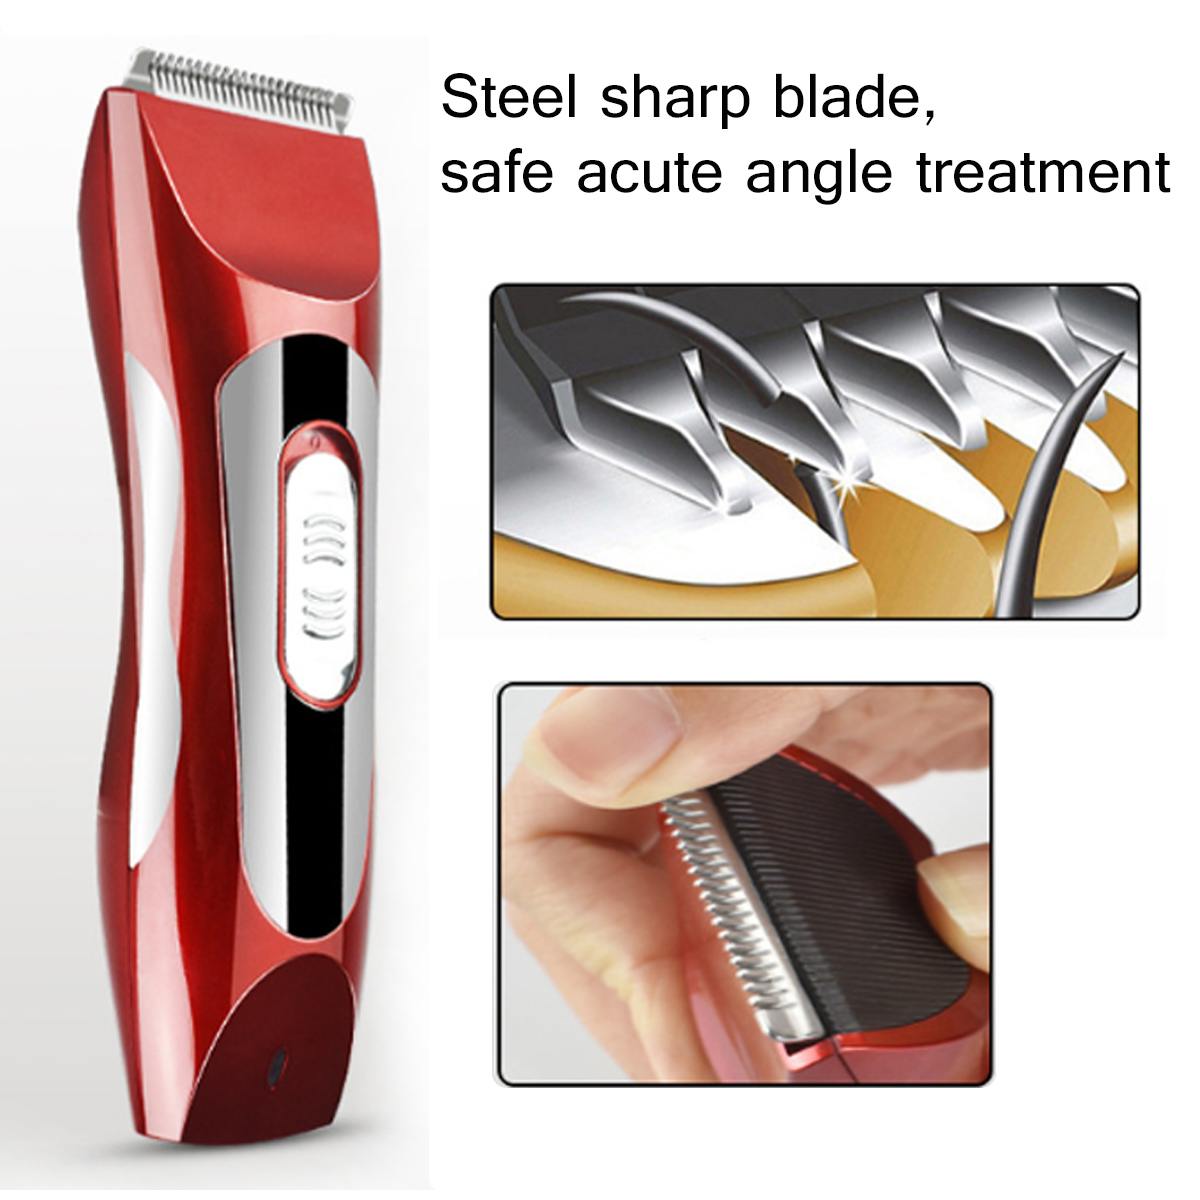 Rechargeable Low-noise Pet Hair Clipper Remover Cutter Grooming Cat Dog Hair Trimmer Electrical Pets Hair Cut Machine